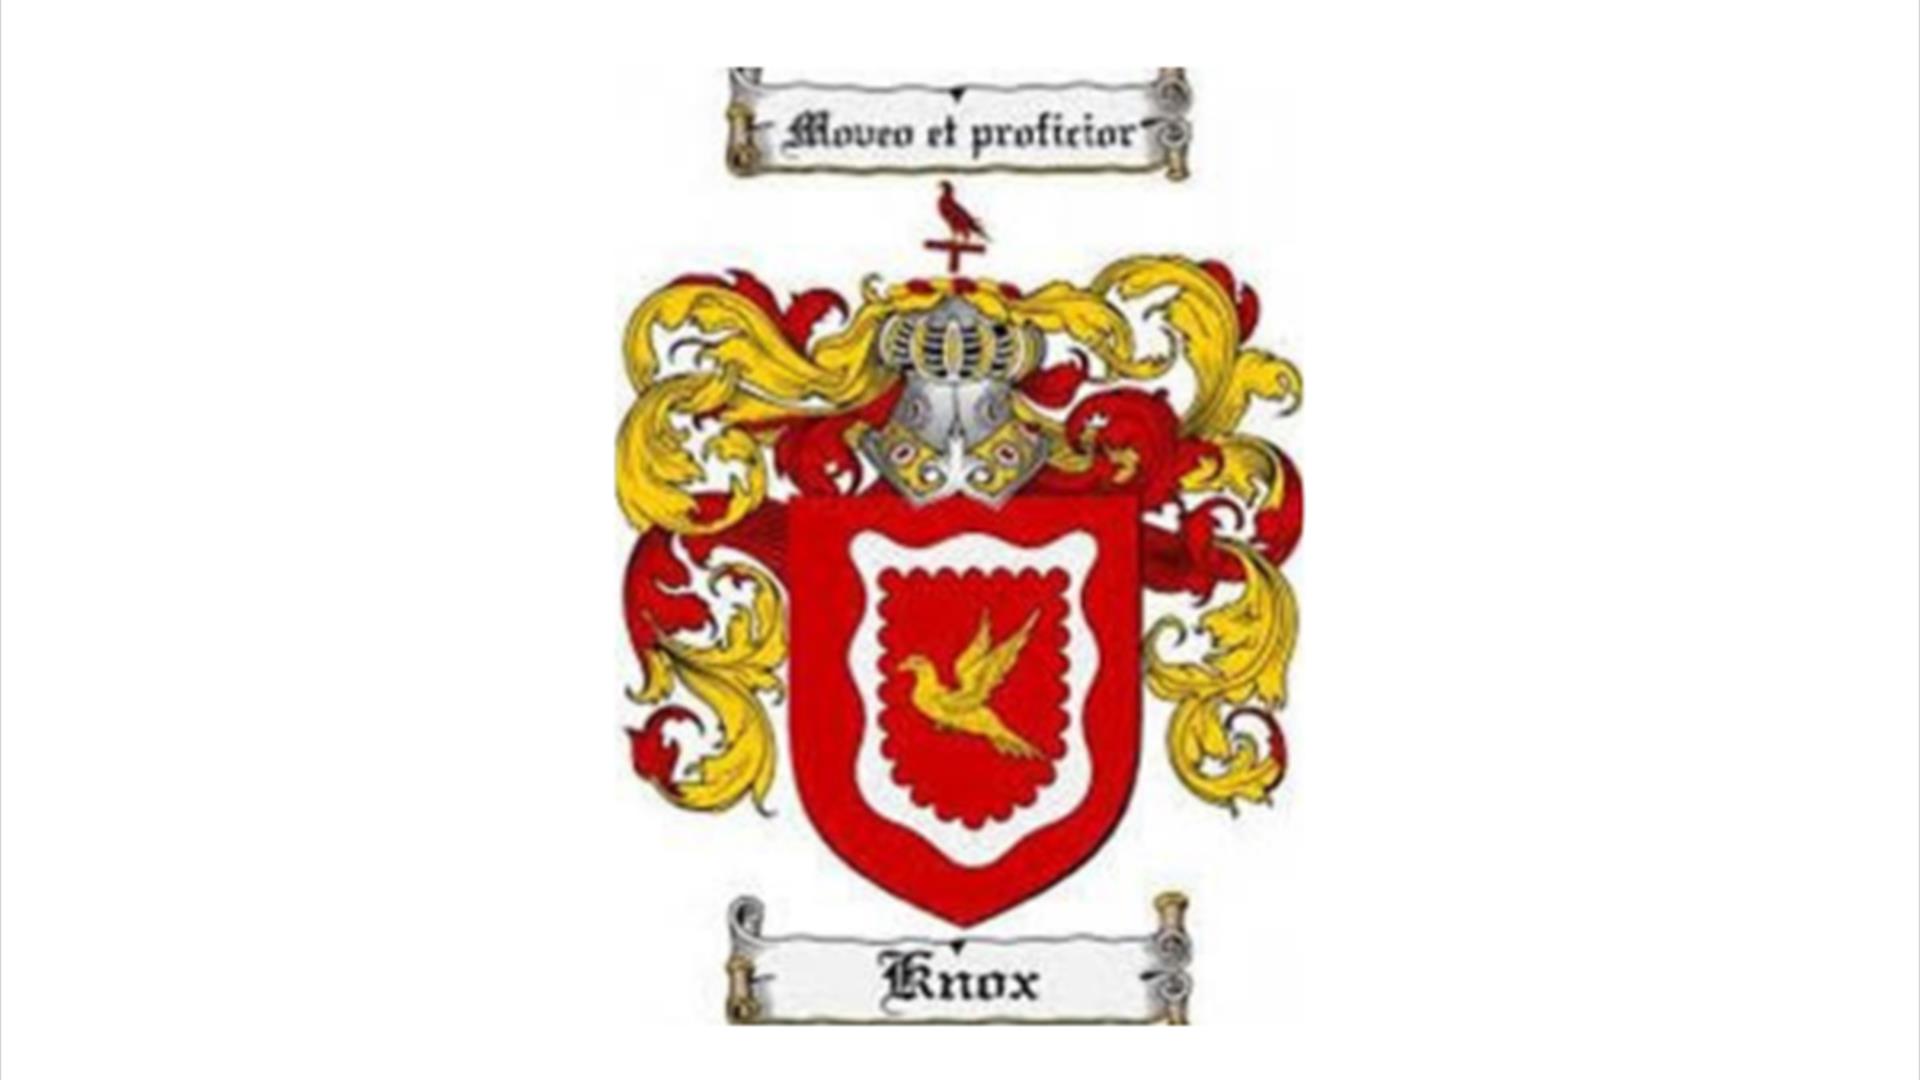 Image of the crest of the Knox family